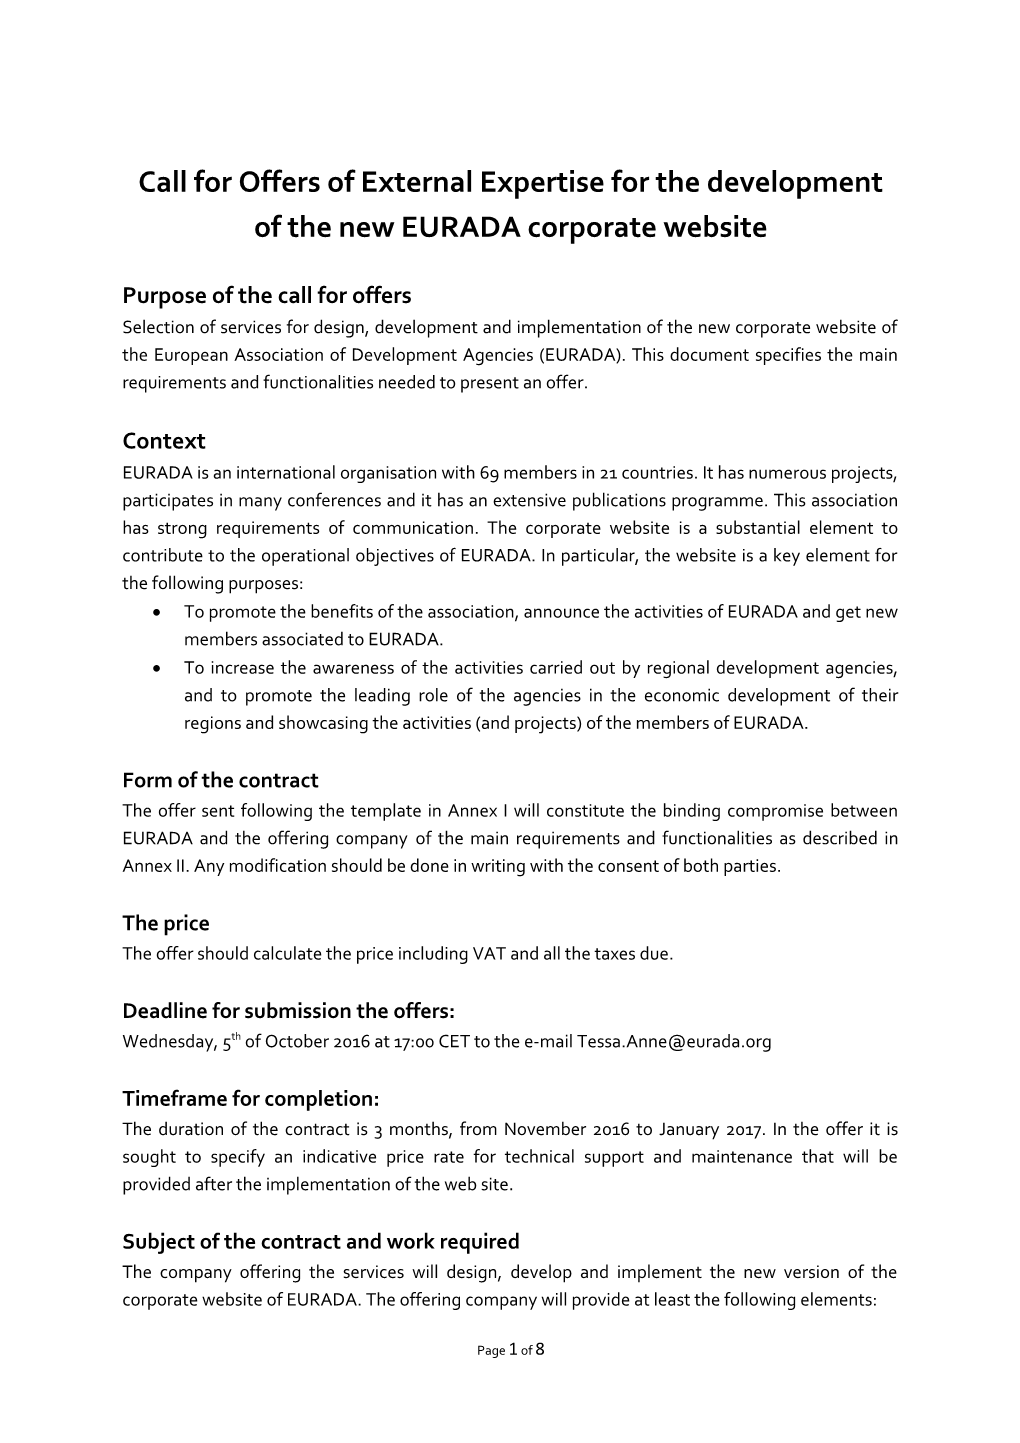 Call for Offers of External Expertise for the Development of the New EURADA Corporate Website